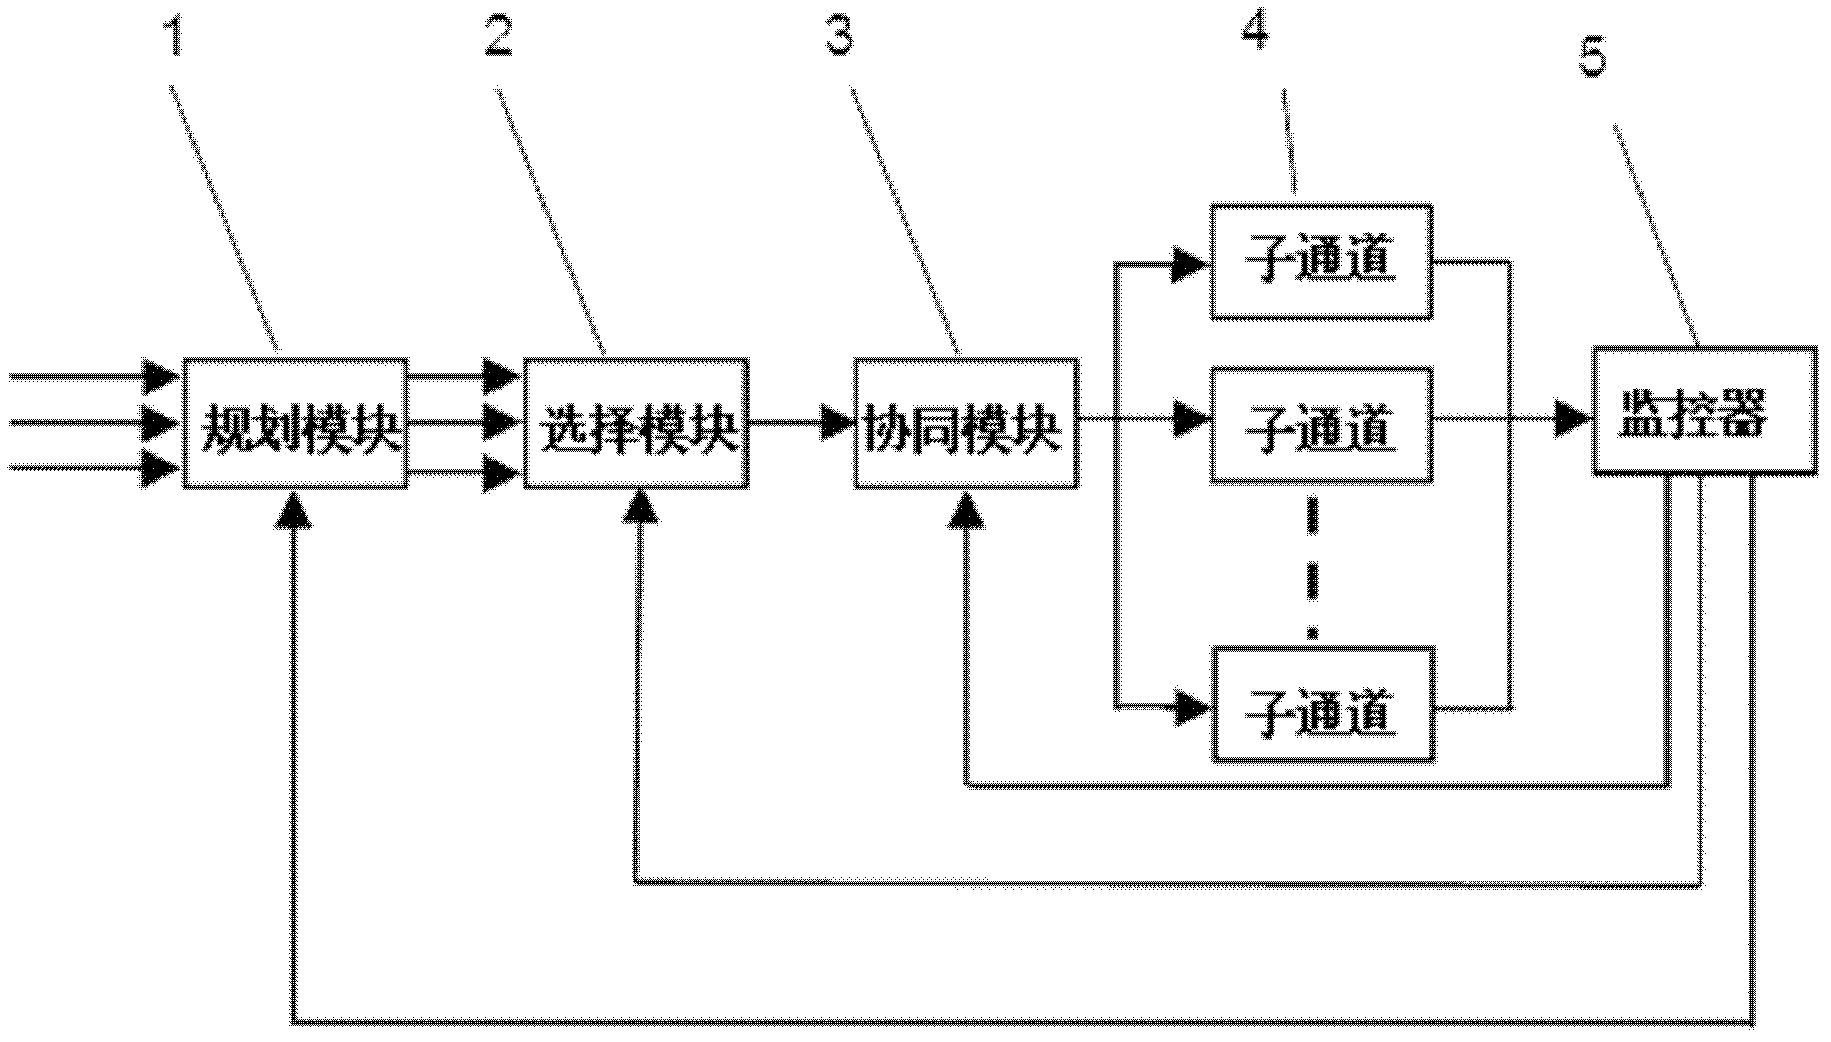 Multi-target cooperative intelligent controller for track traffic and method adopted by same